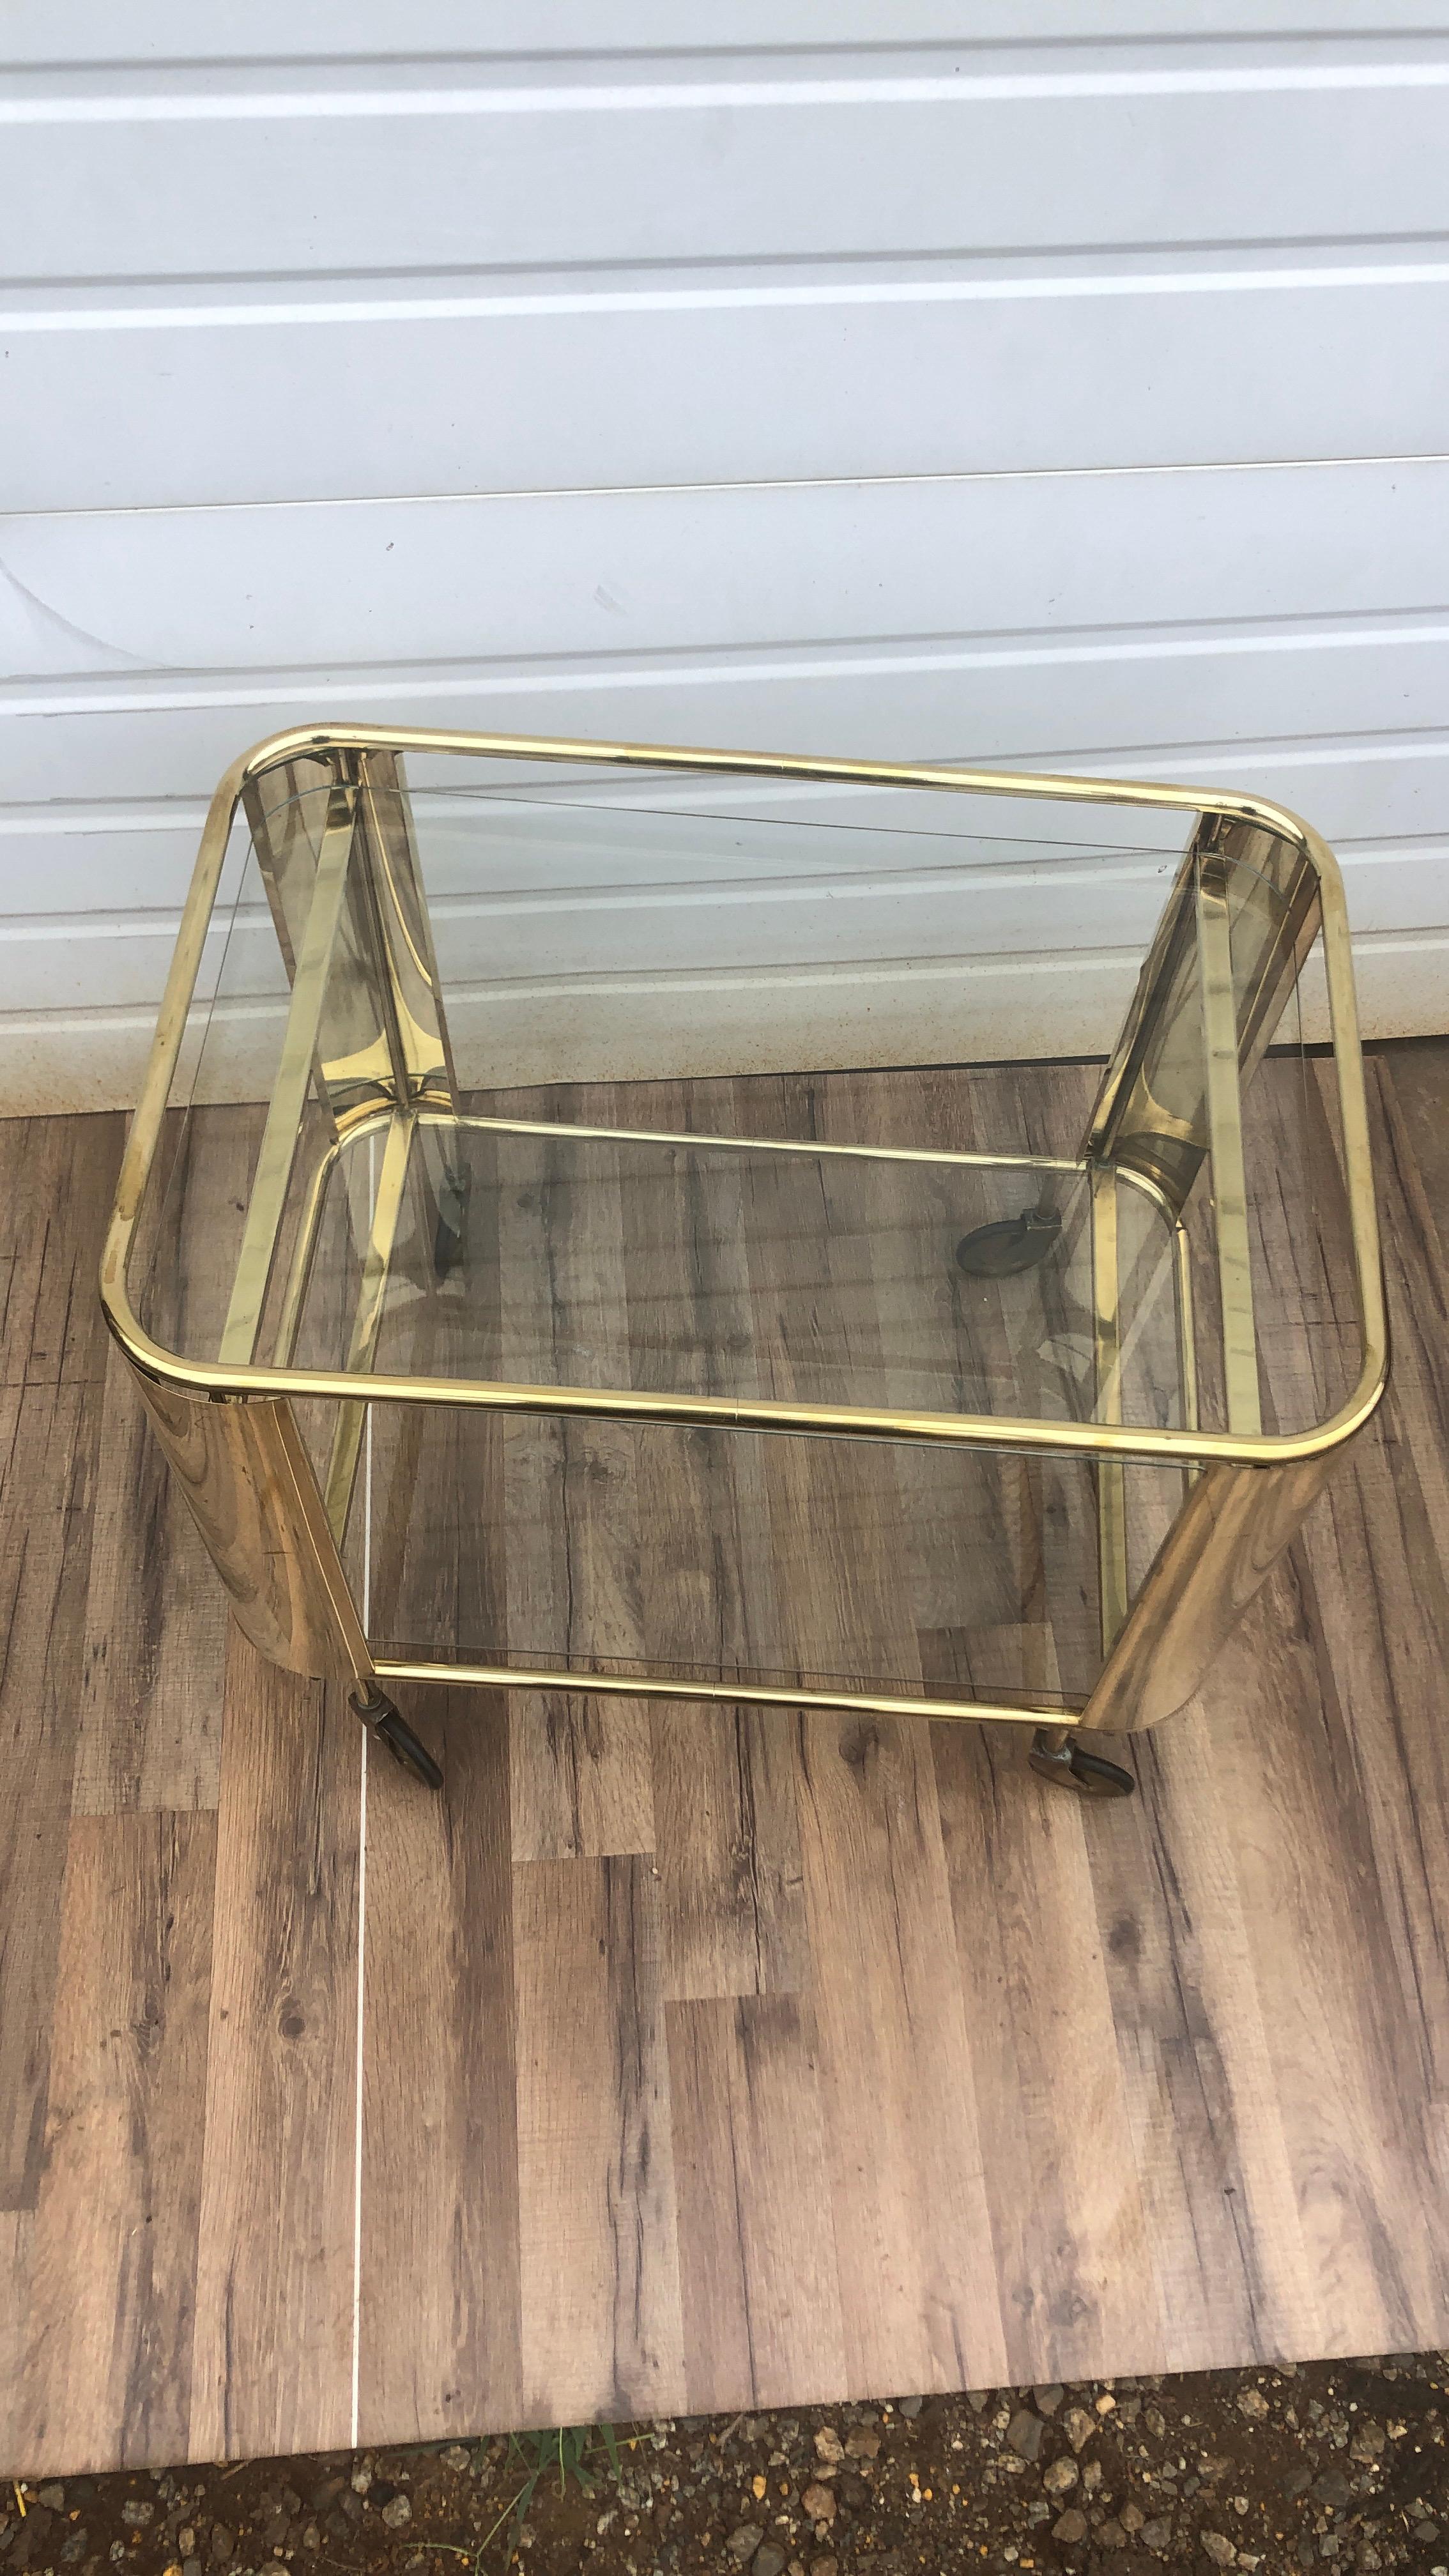 Italian two-tiered rolling brass bar cart. The rectangular cart is framed with four curved brass panels. The size makes this ideal as a side table or bar cart.

Please reach out to us for competitive shipping rates.